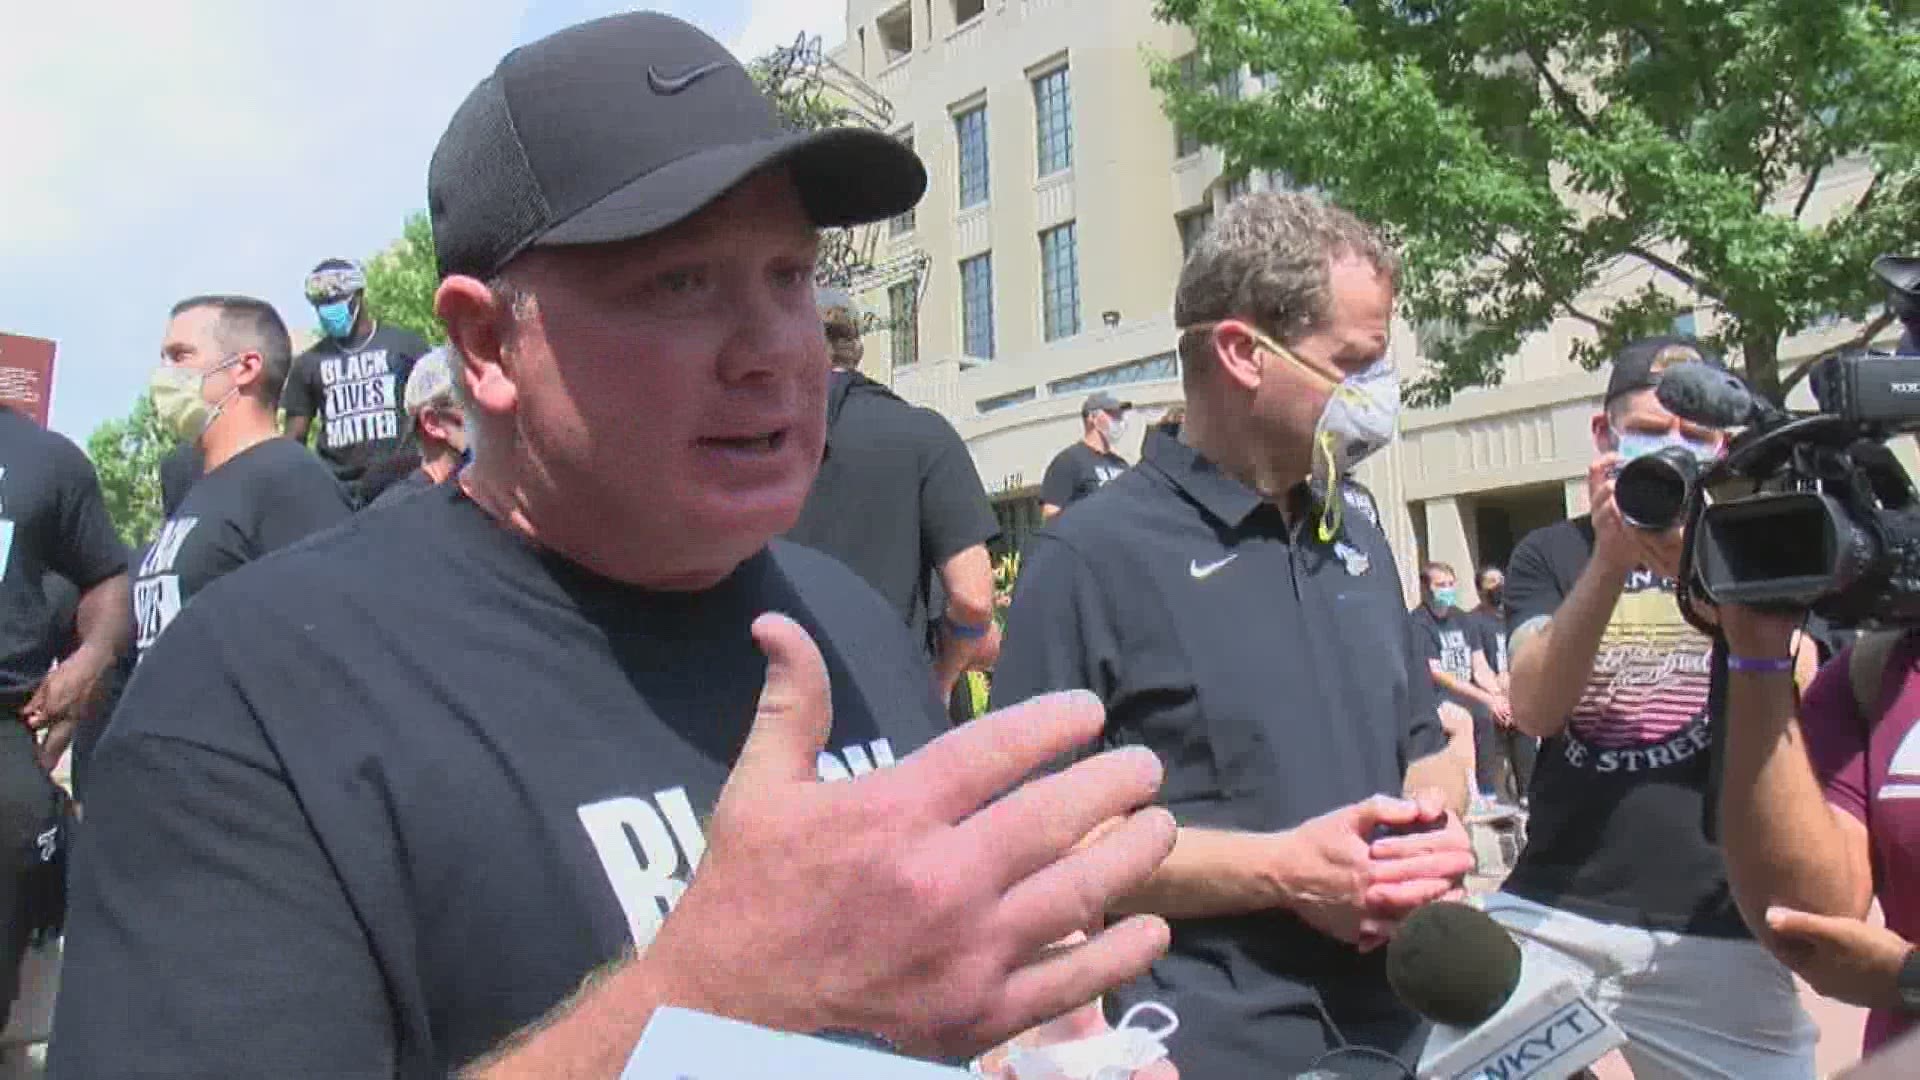 UK's football team, including coach Mark Stoops, participated in Lexington protests Friday.